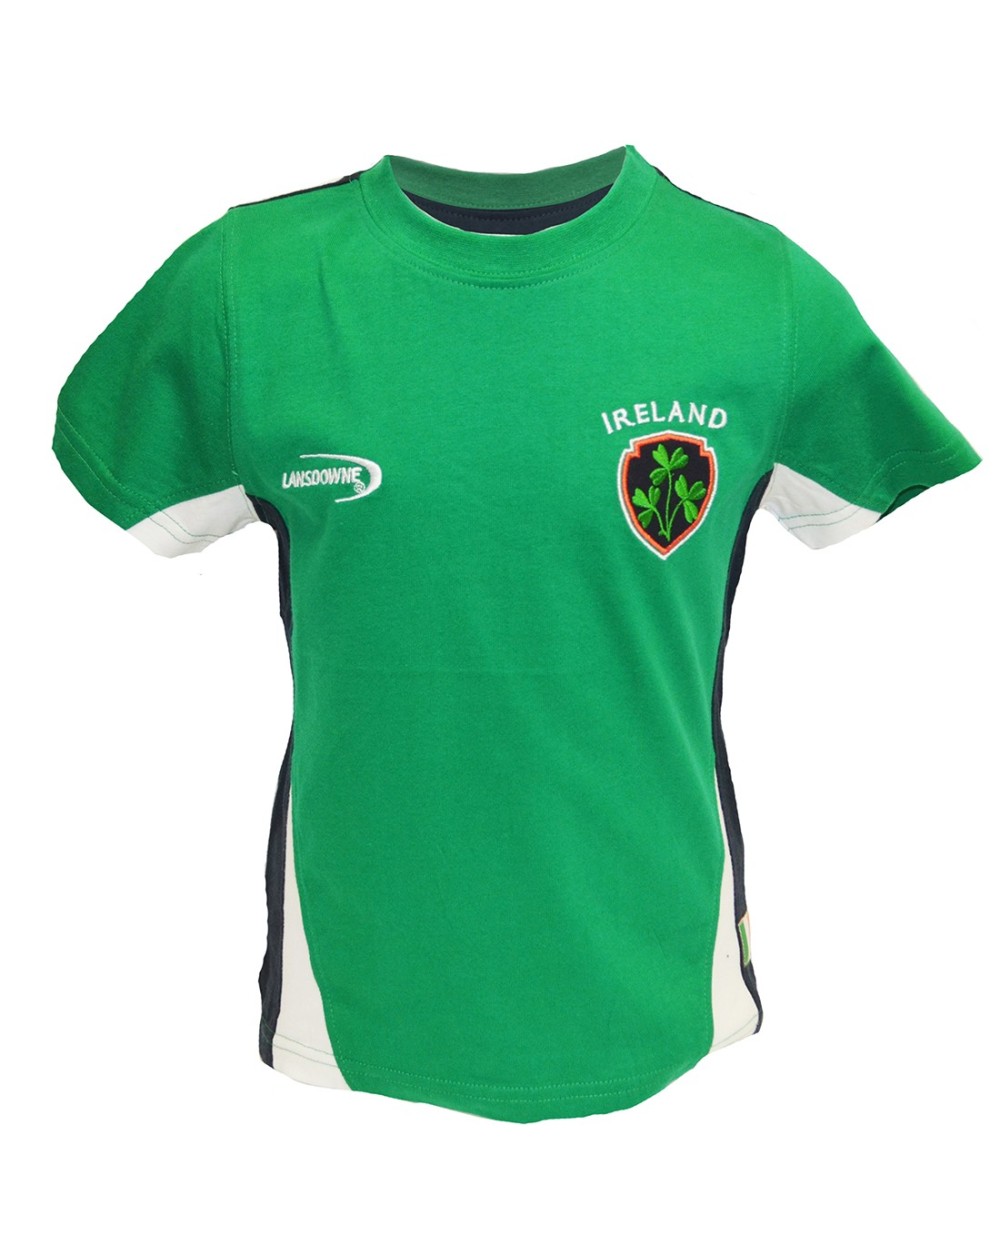 Lansdowne Sports Official Collection Emerald Kids Crest T-Shirt